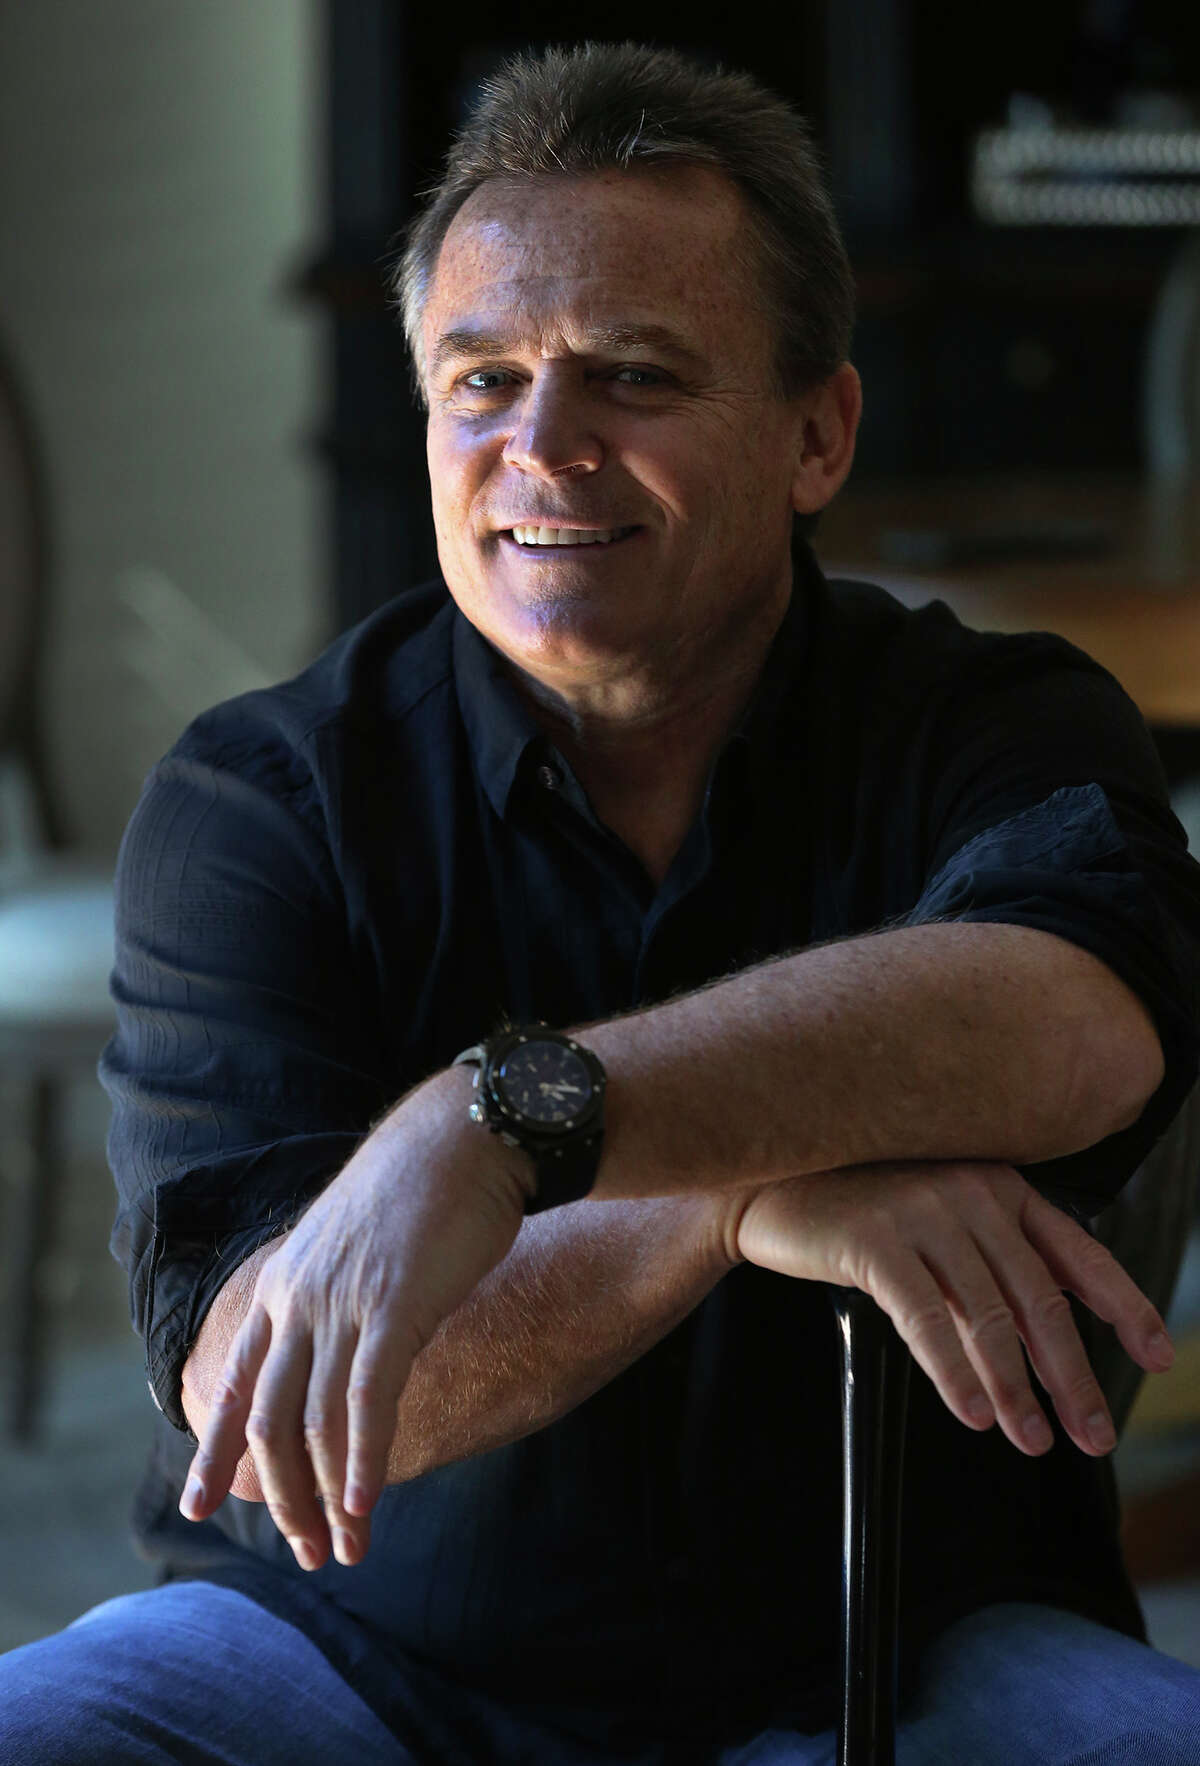 Toronto Blue Jays manager John Gibbons has been selected as 2015 Express-News Sportsman of the Year. Gibbons, a MacArthur High School graduate and former player with the New York Mets, led the Blue Jays to their first American League Division Series since 1993.